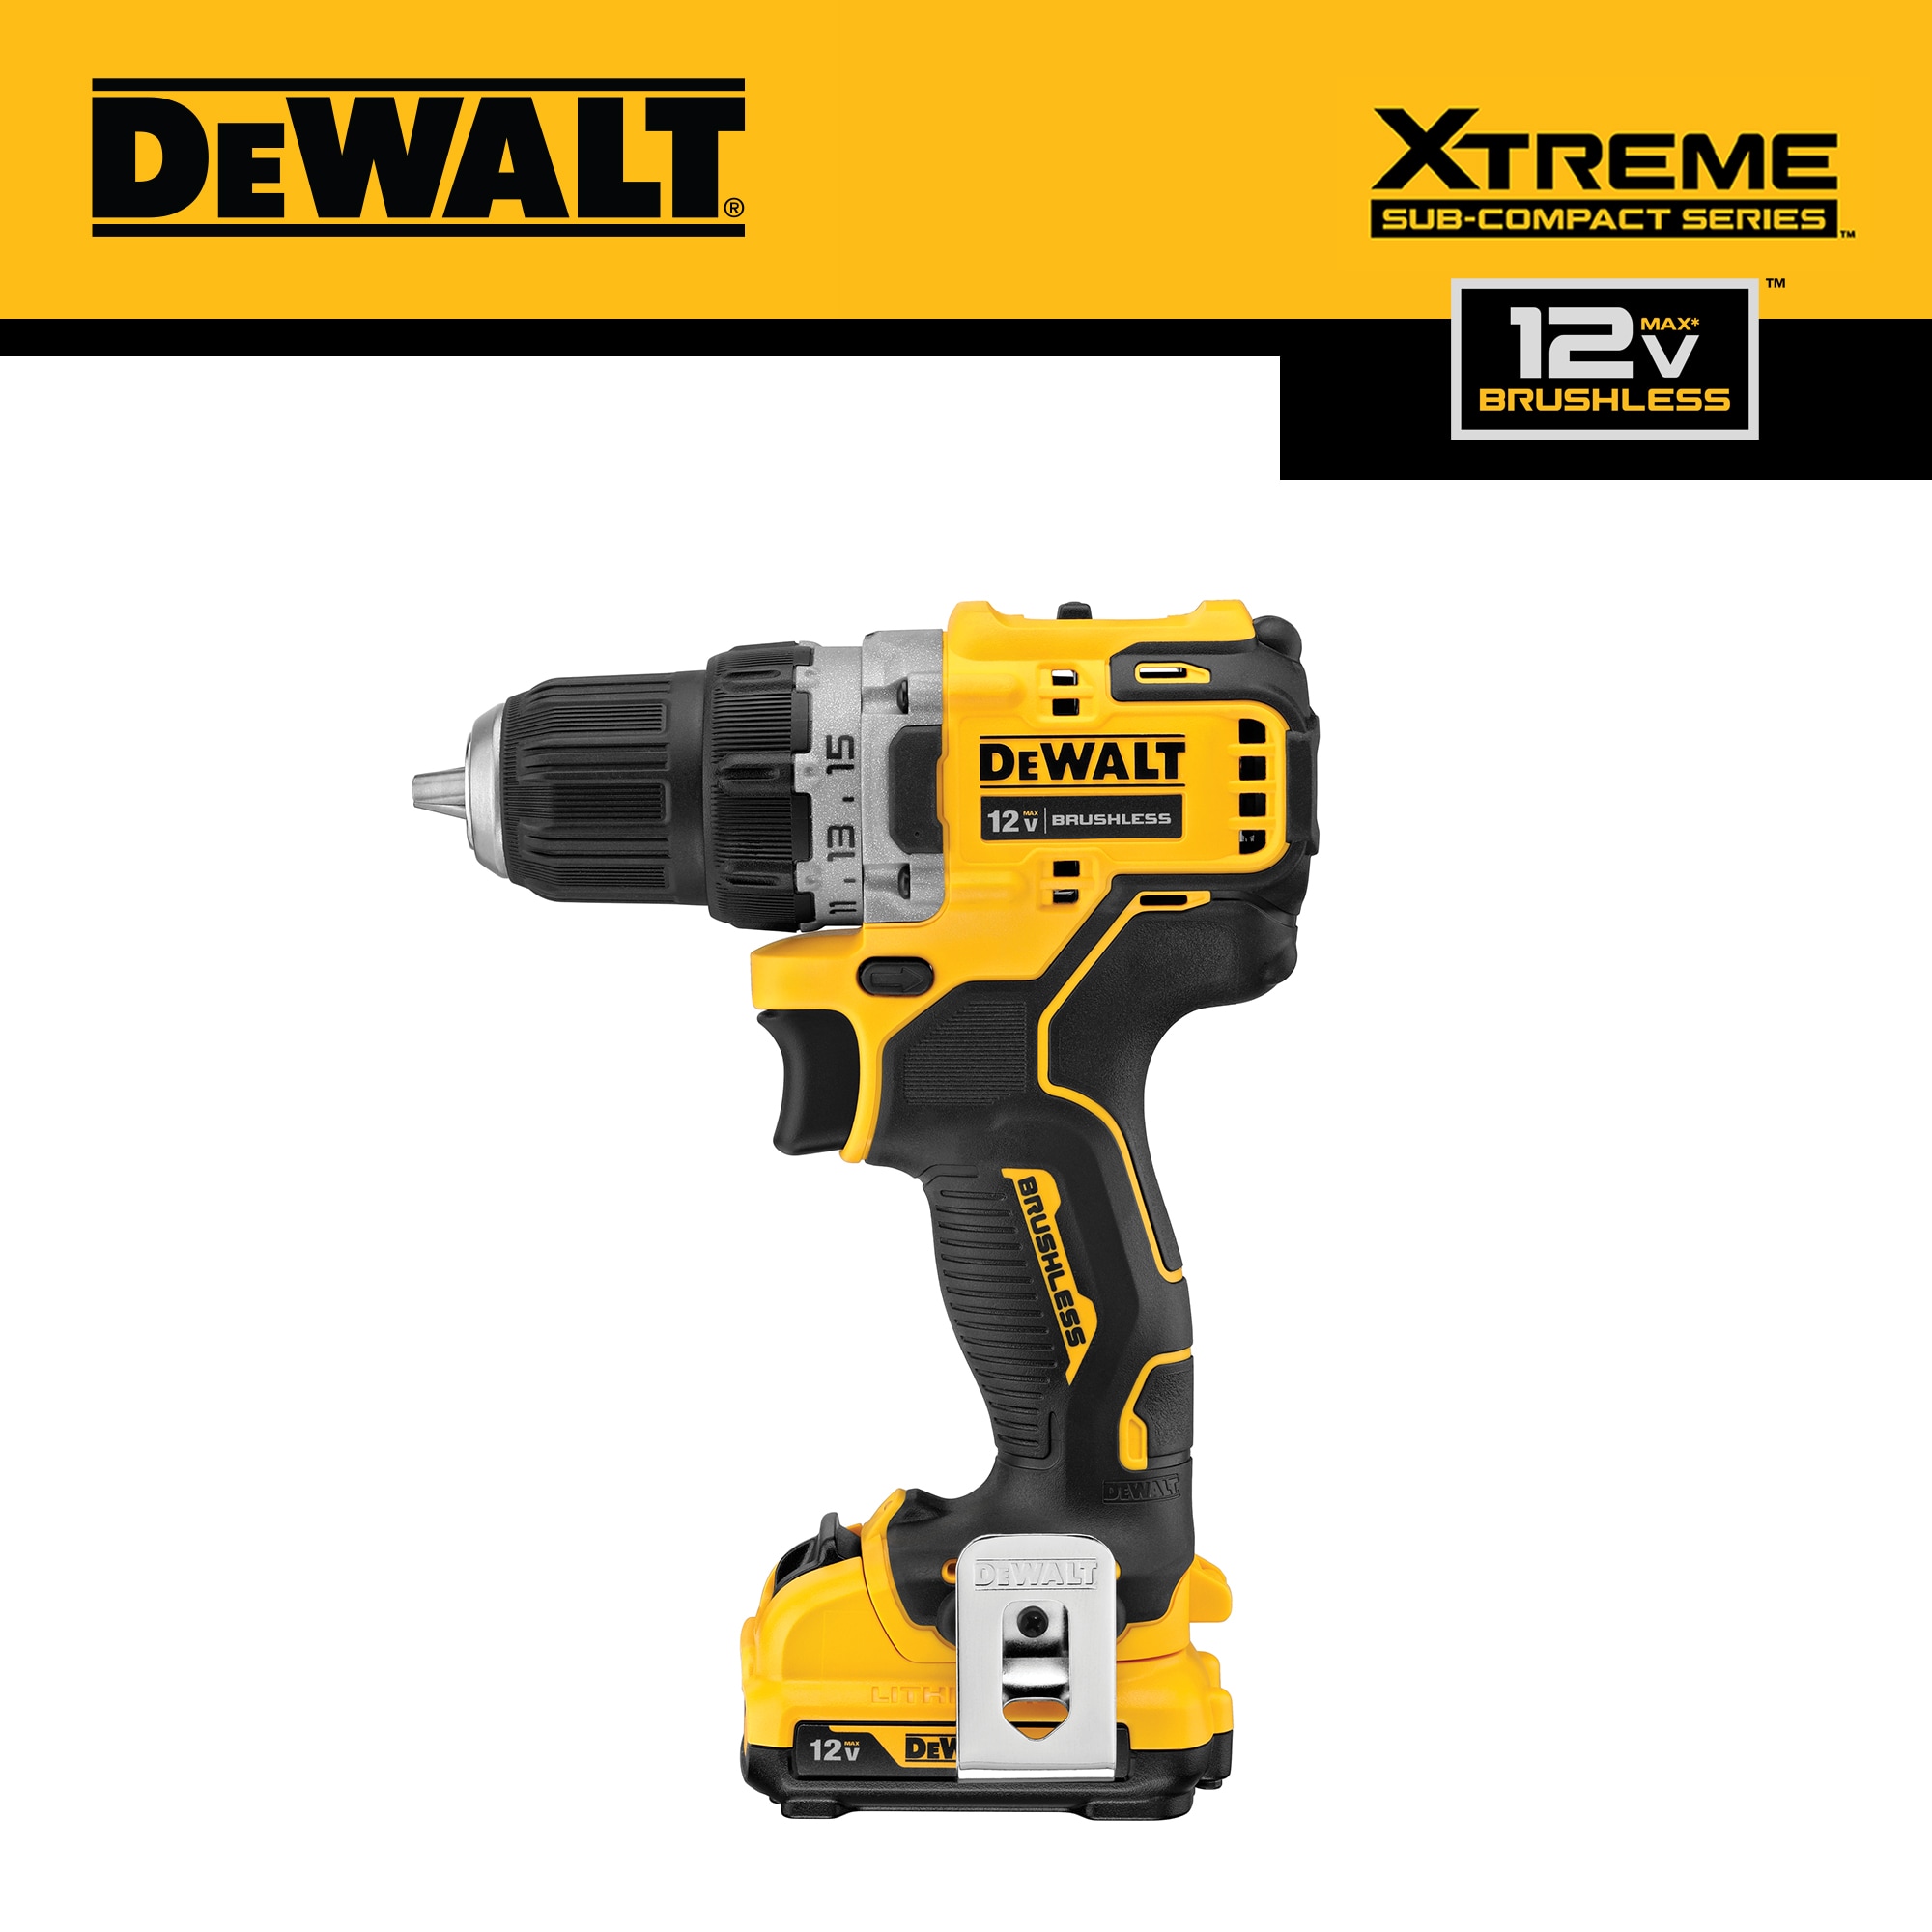 DEWALT XTREME 12-volt Max 3/8-in Brushless Cordless Drill (Tool Only)